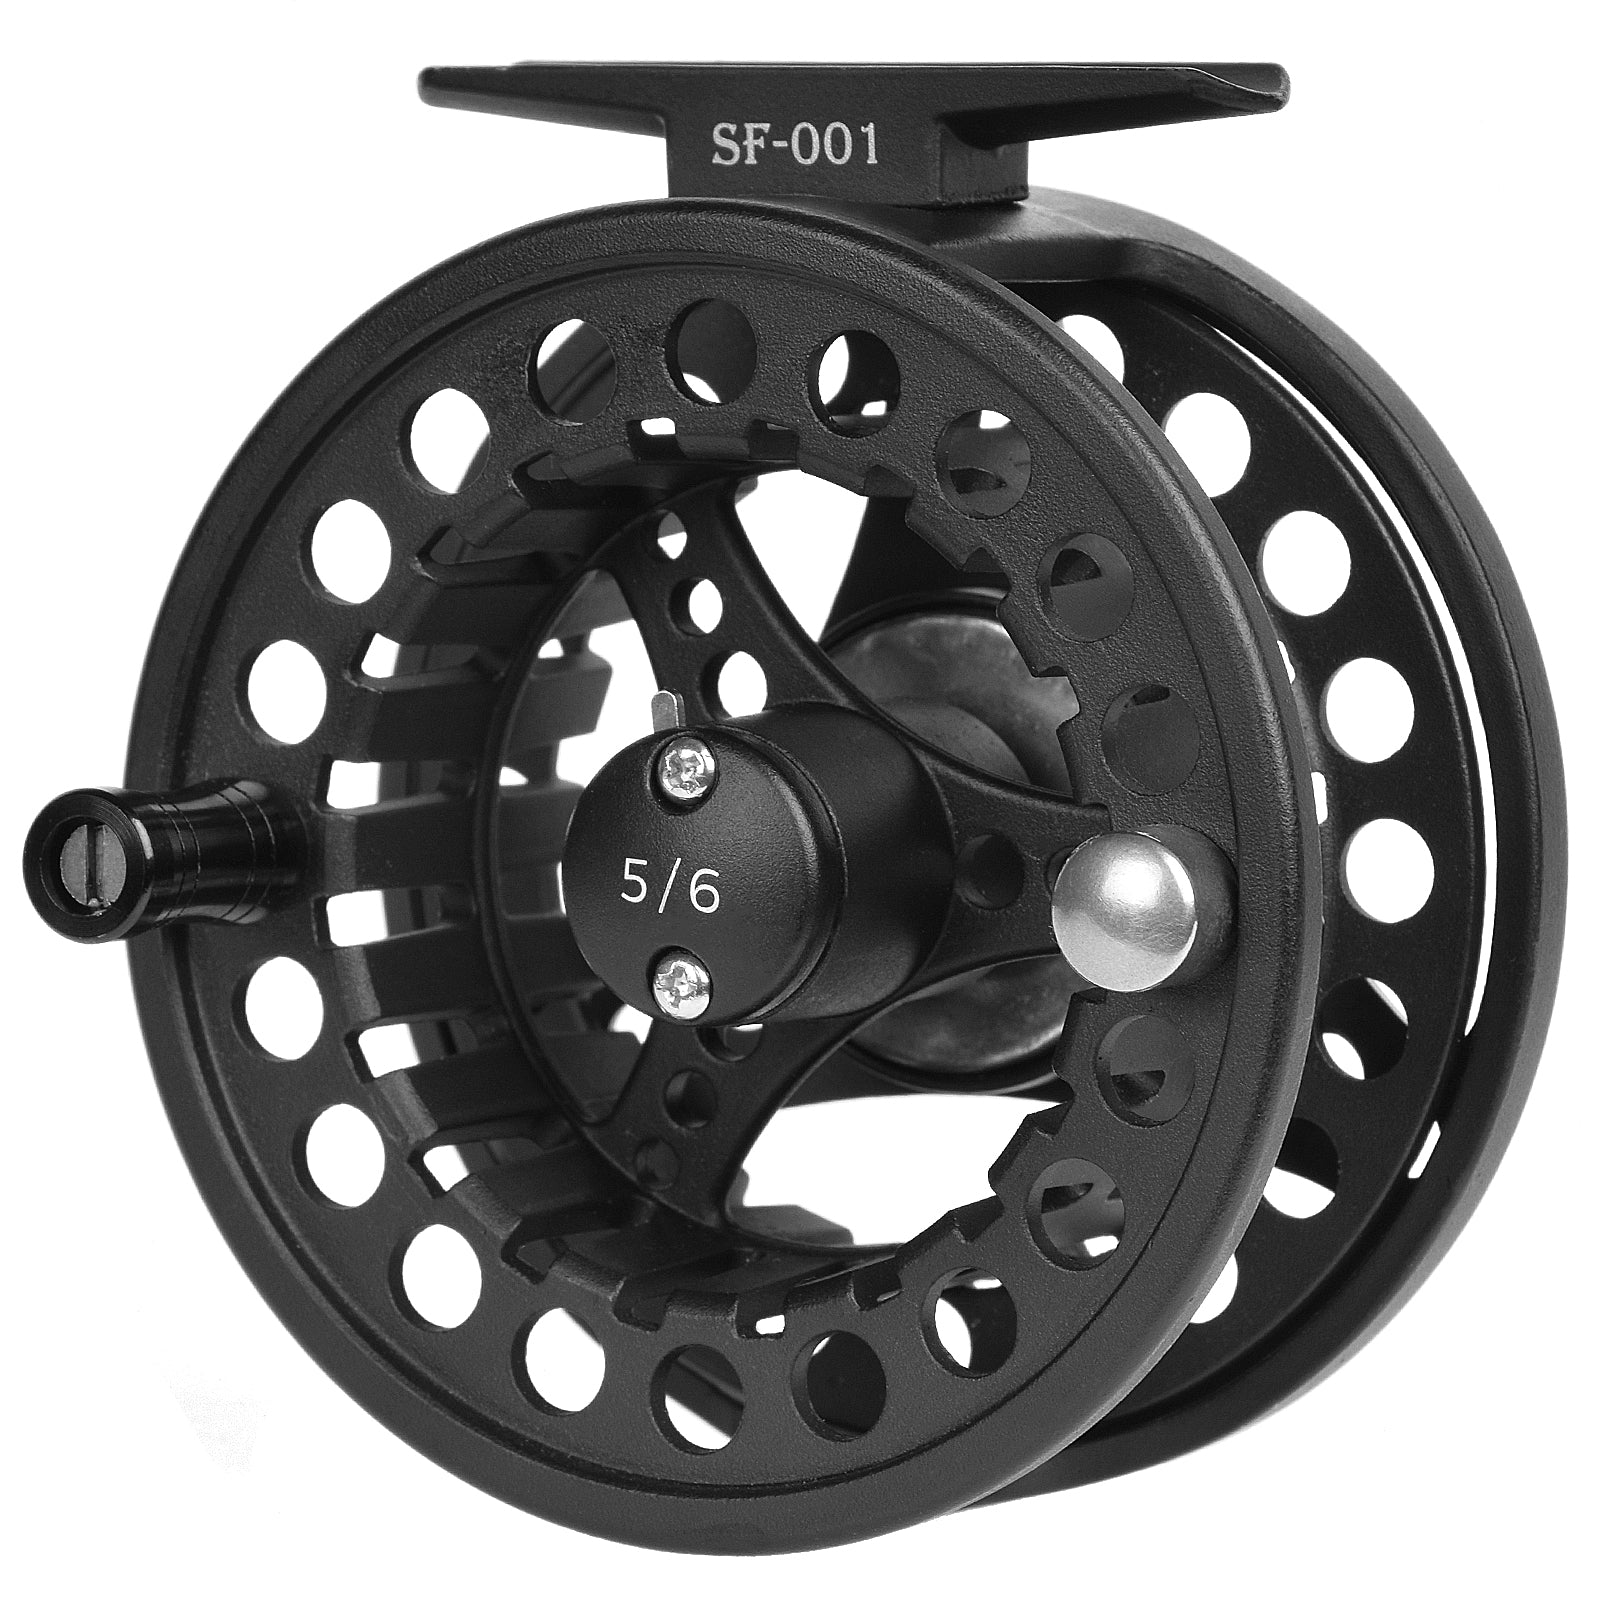 SF Large Arbor Fly Fishing Reel with Aluminum Alloy Body 3/4wt 5